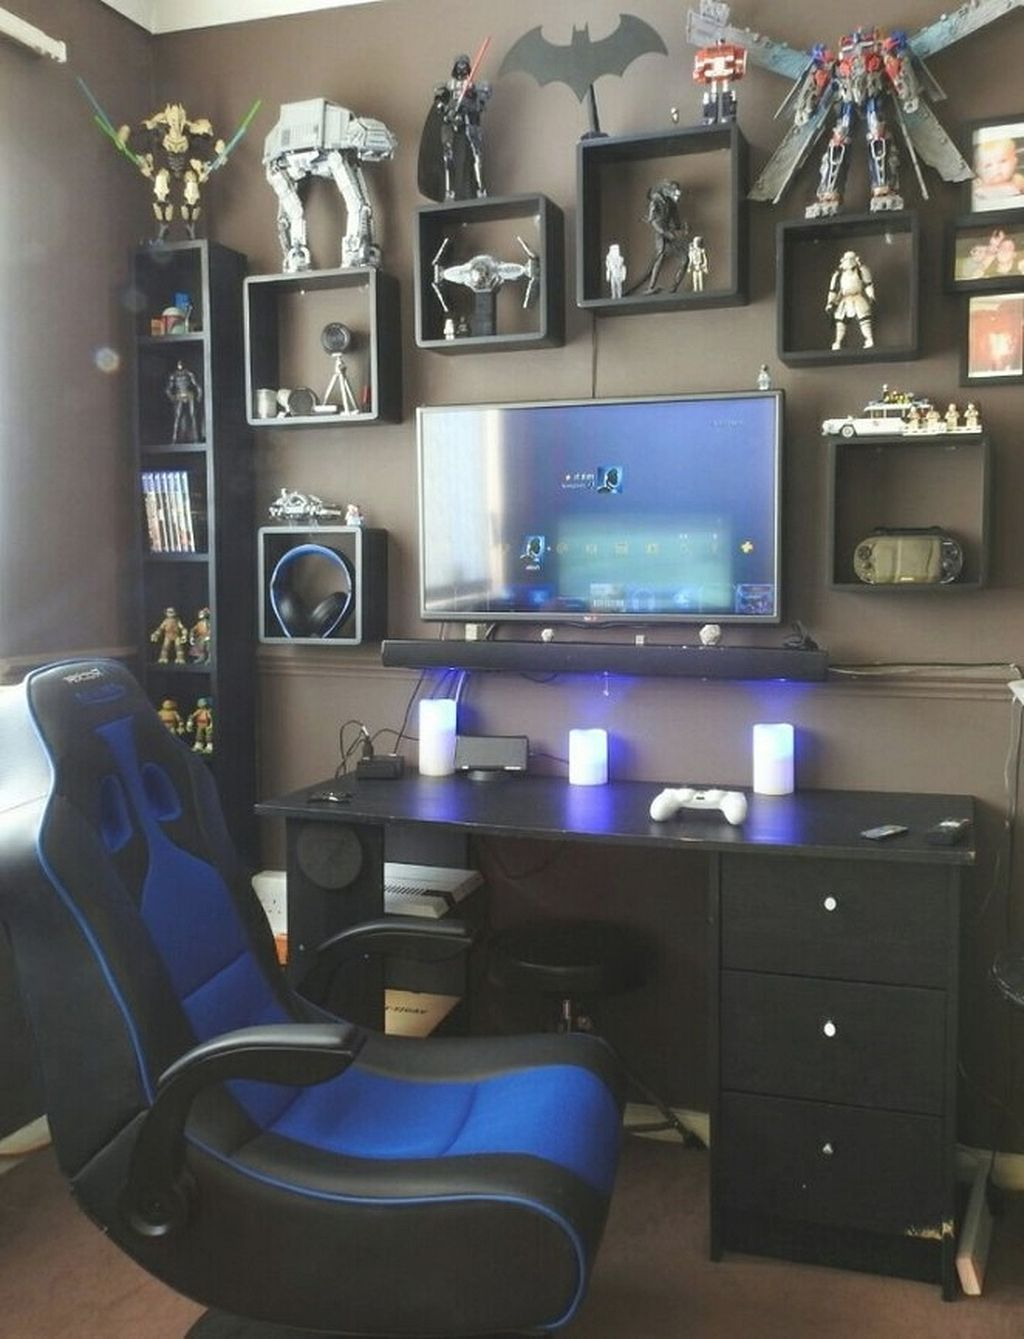 Nice 40+ Awesome Gamer Room Decoration Ideas Https://Kidmagz/40 avec Setup Gaming Chambre